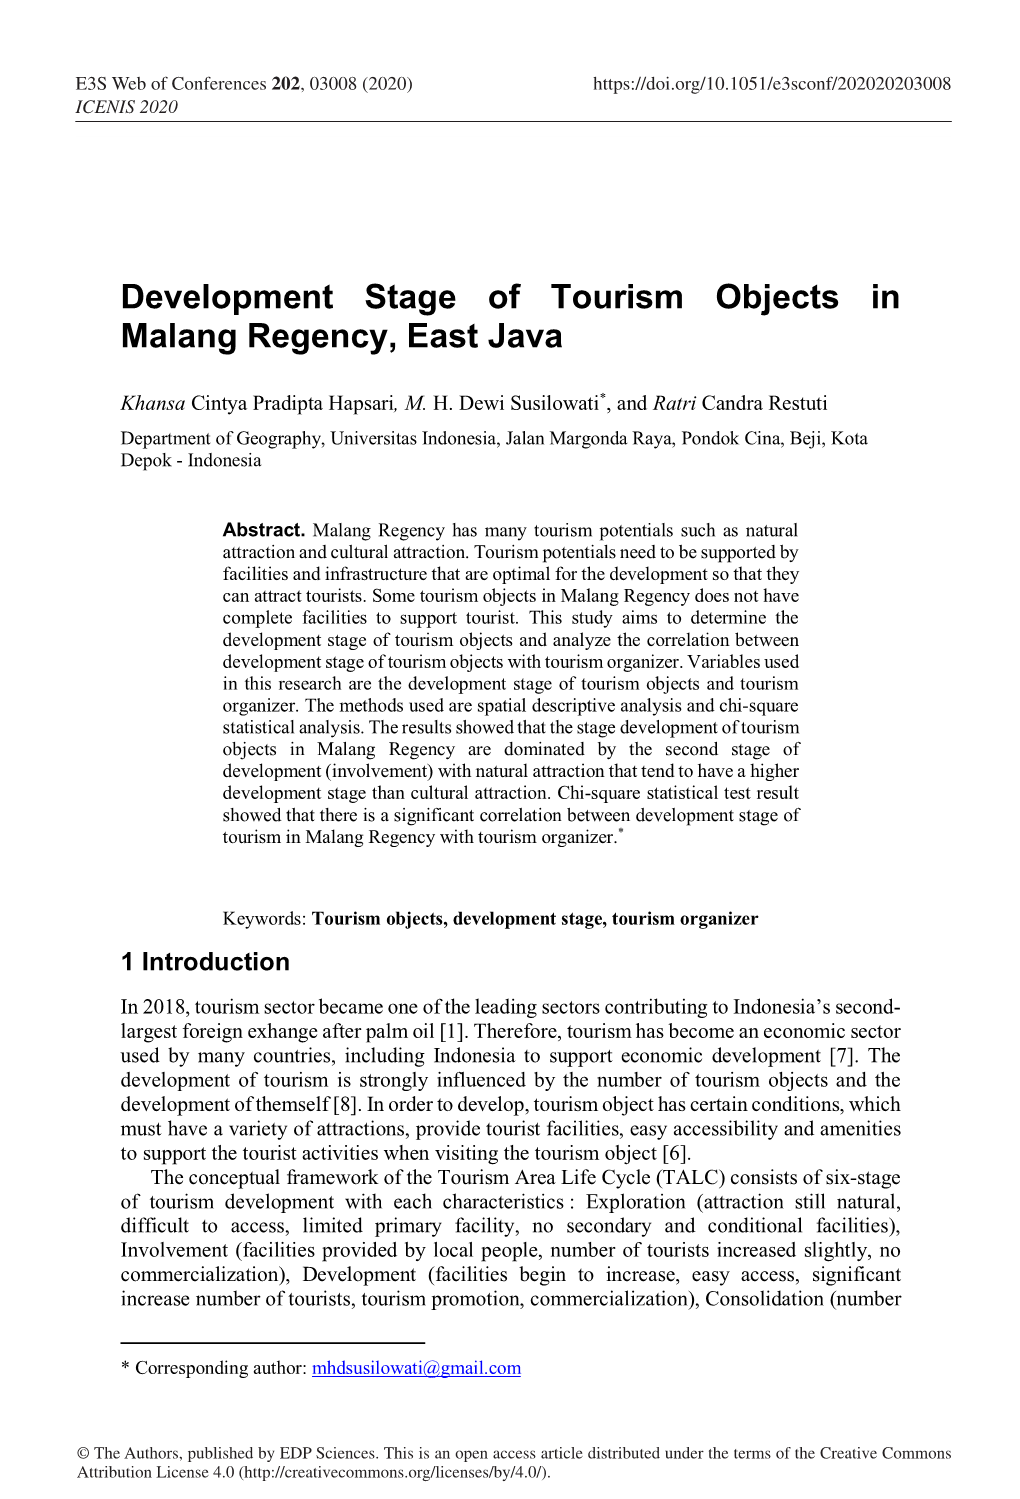 Development Stage of Tourism Objects in Malang Regency, East Java